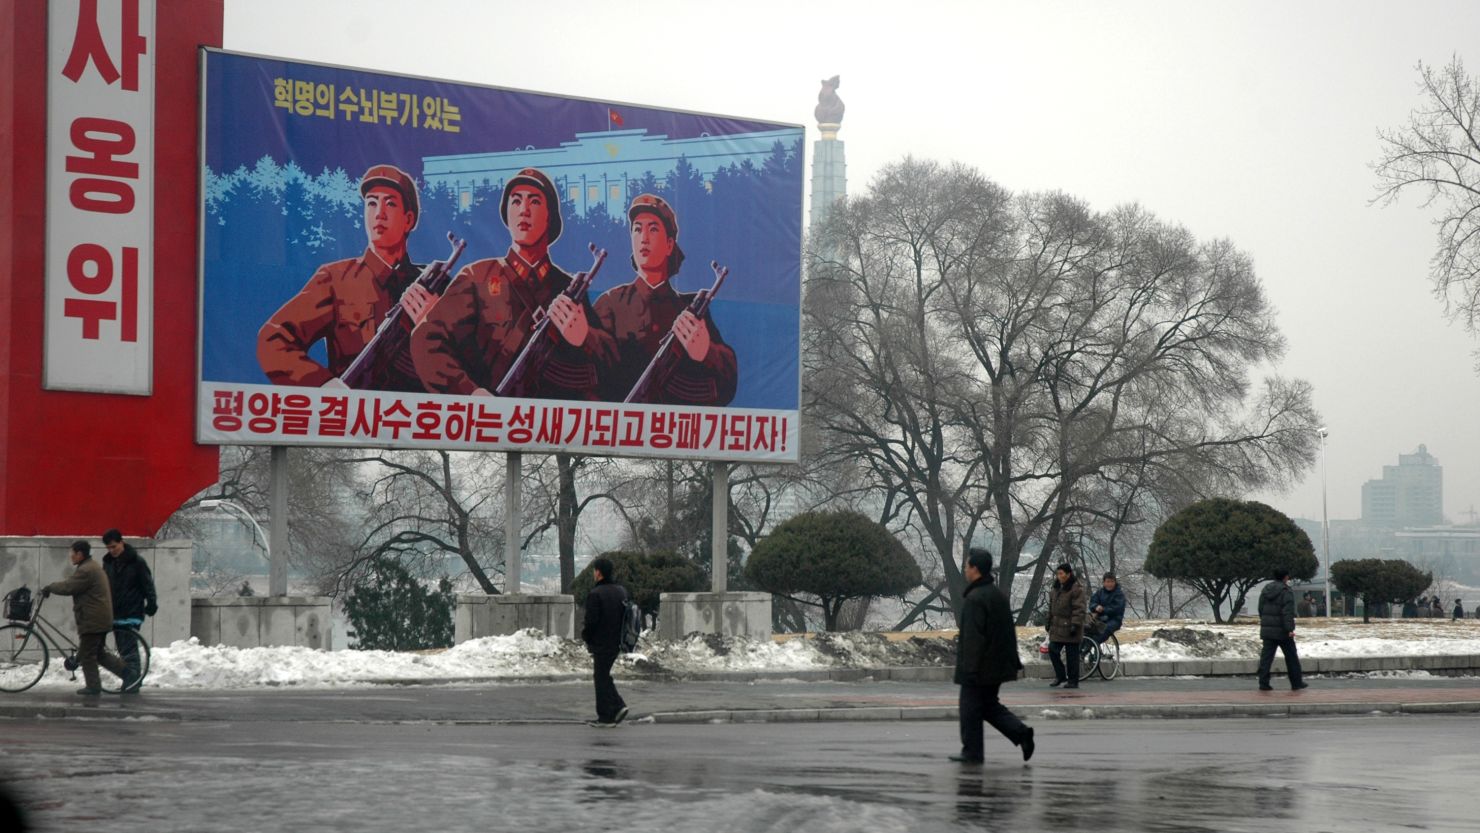 Propaganda billboards tower over passers by in Pyongyang in this image taken in December 2010.